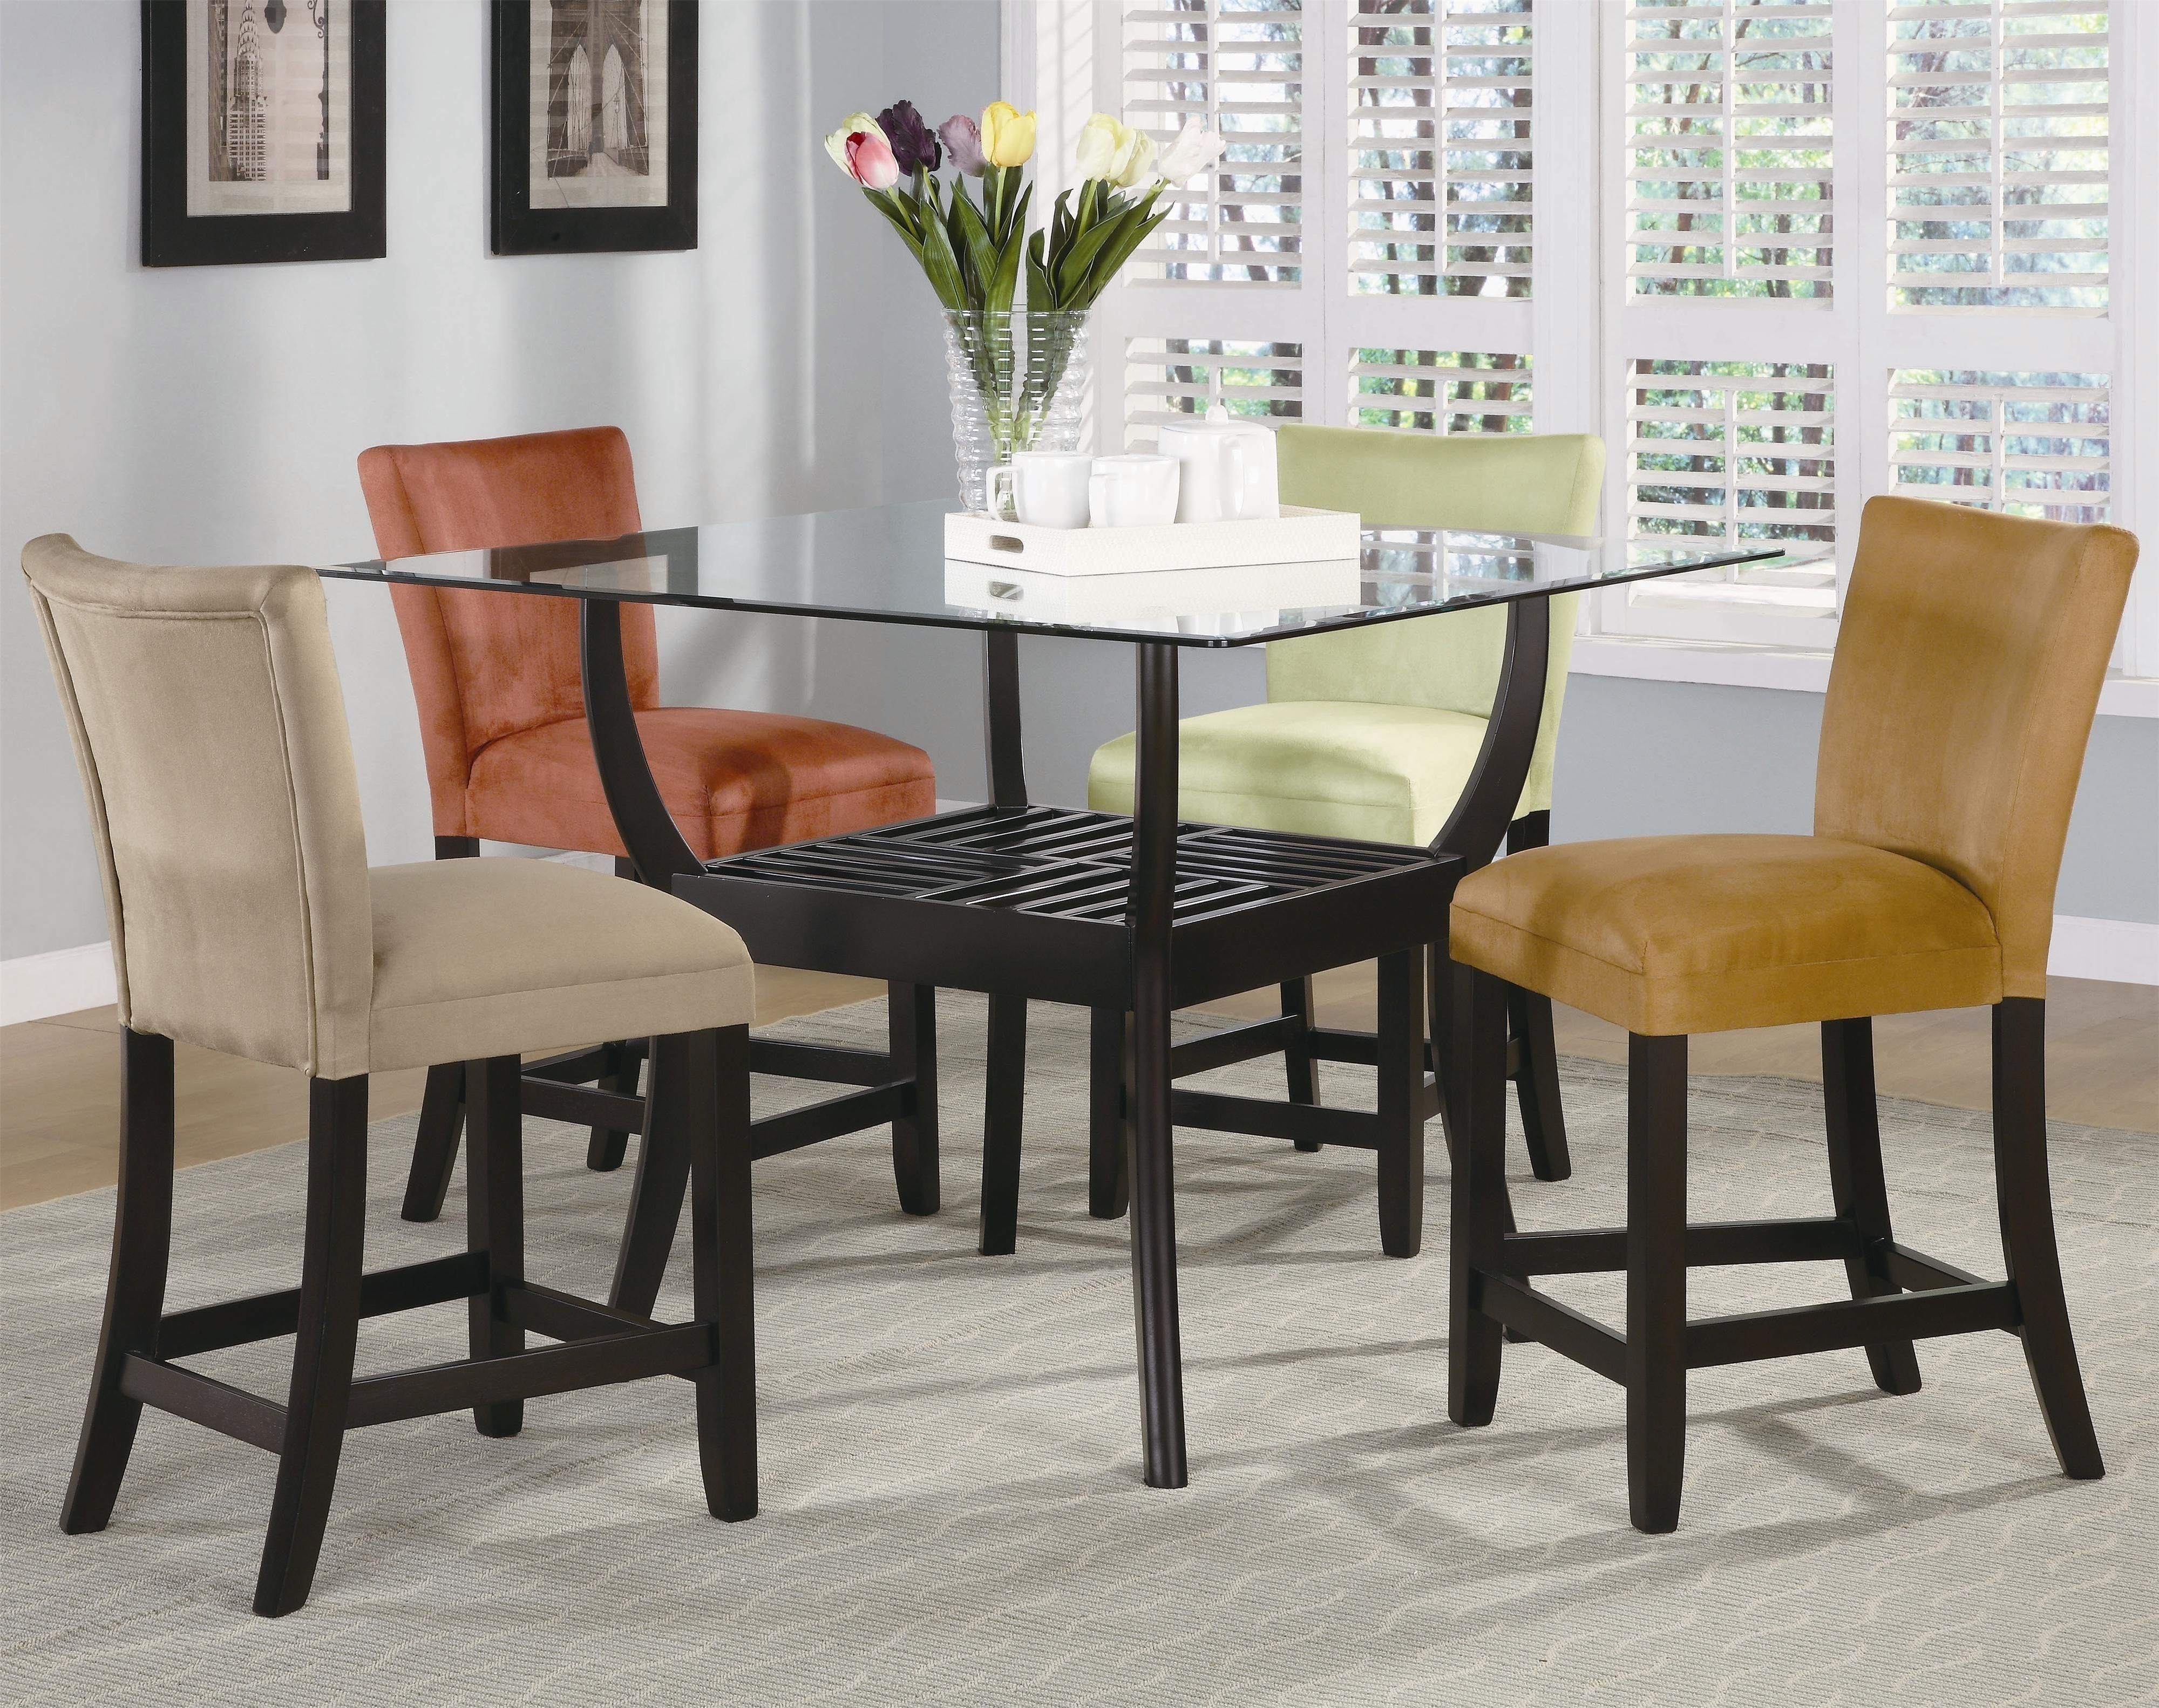 Gray Round Dining Table Set Awesome Bloomfield 5 Piece Counter Intended For 2018 Hyland 5 Piece Counter Sets With Stools (View 18 of 20)